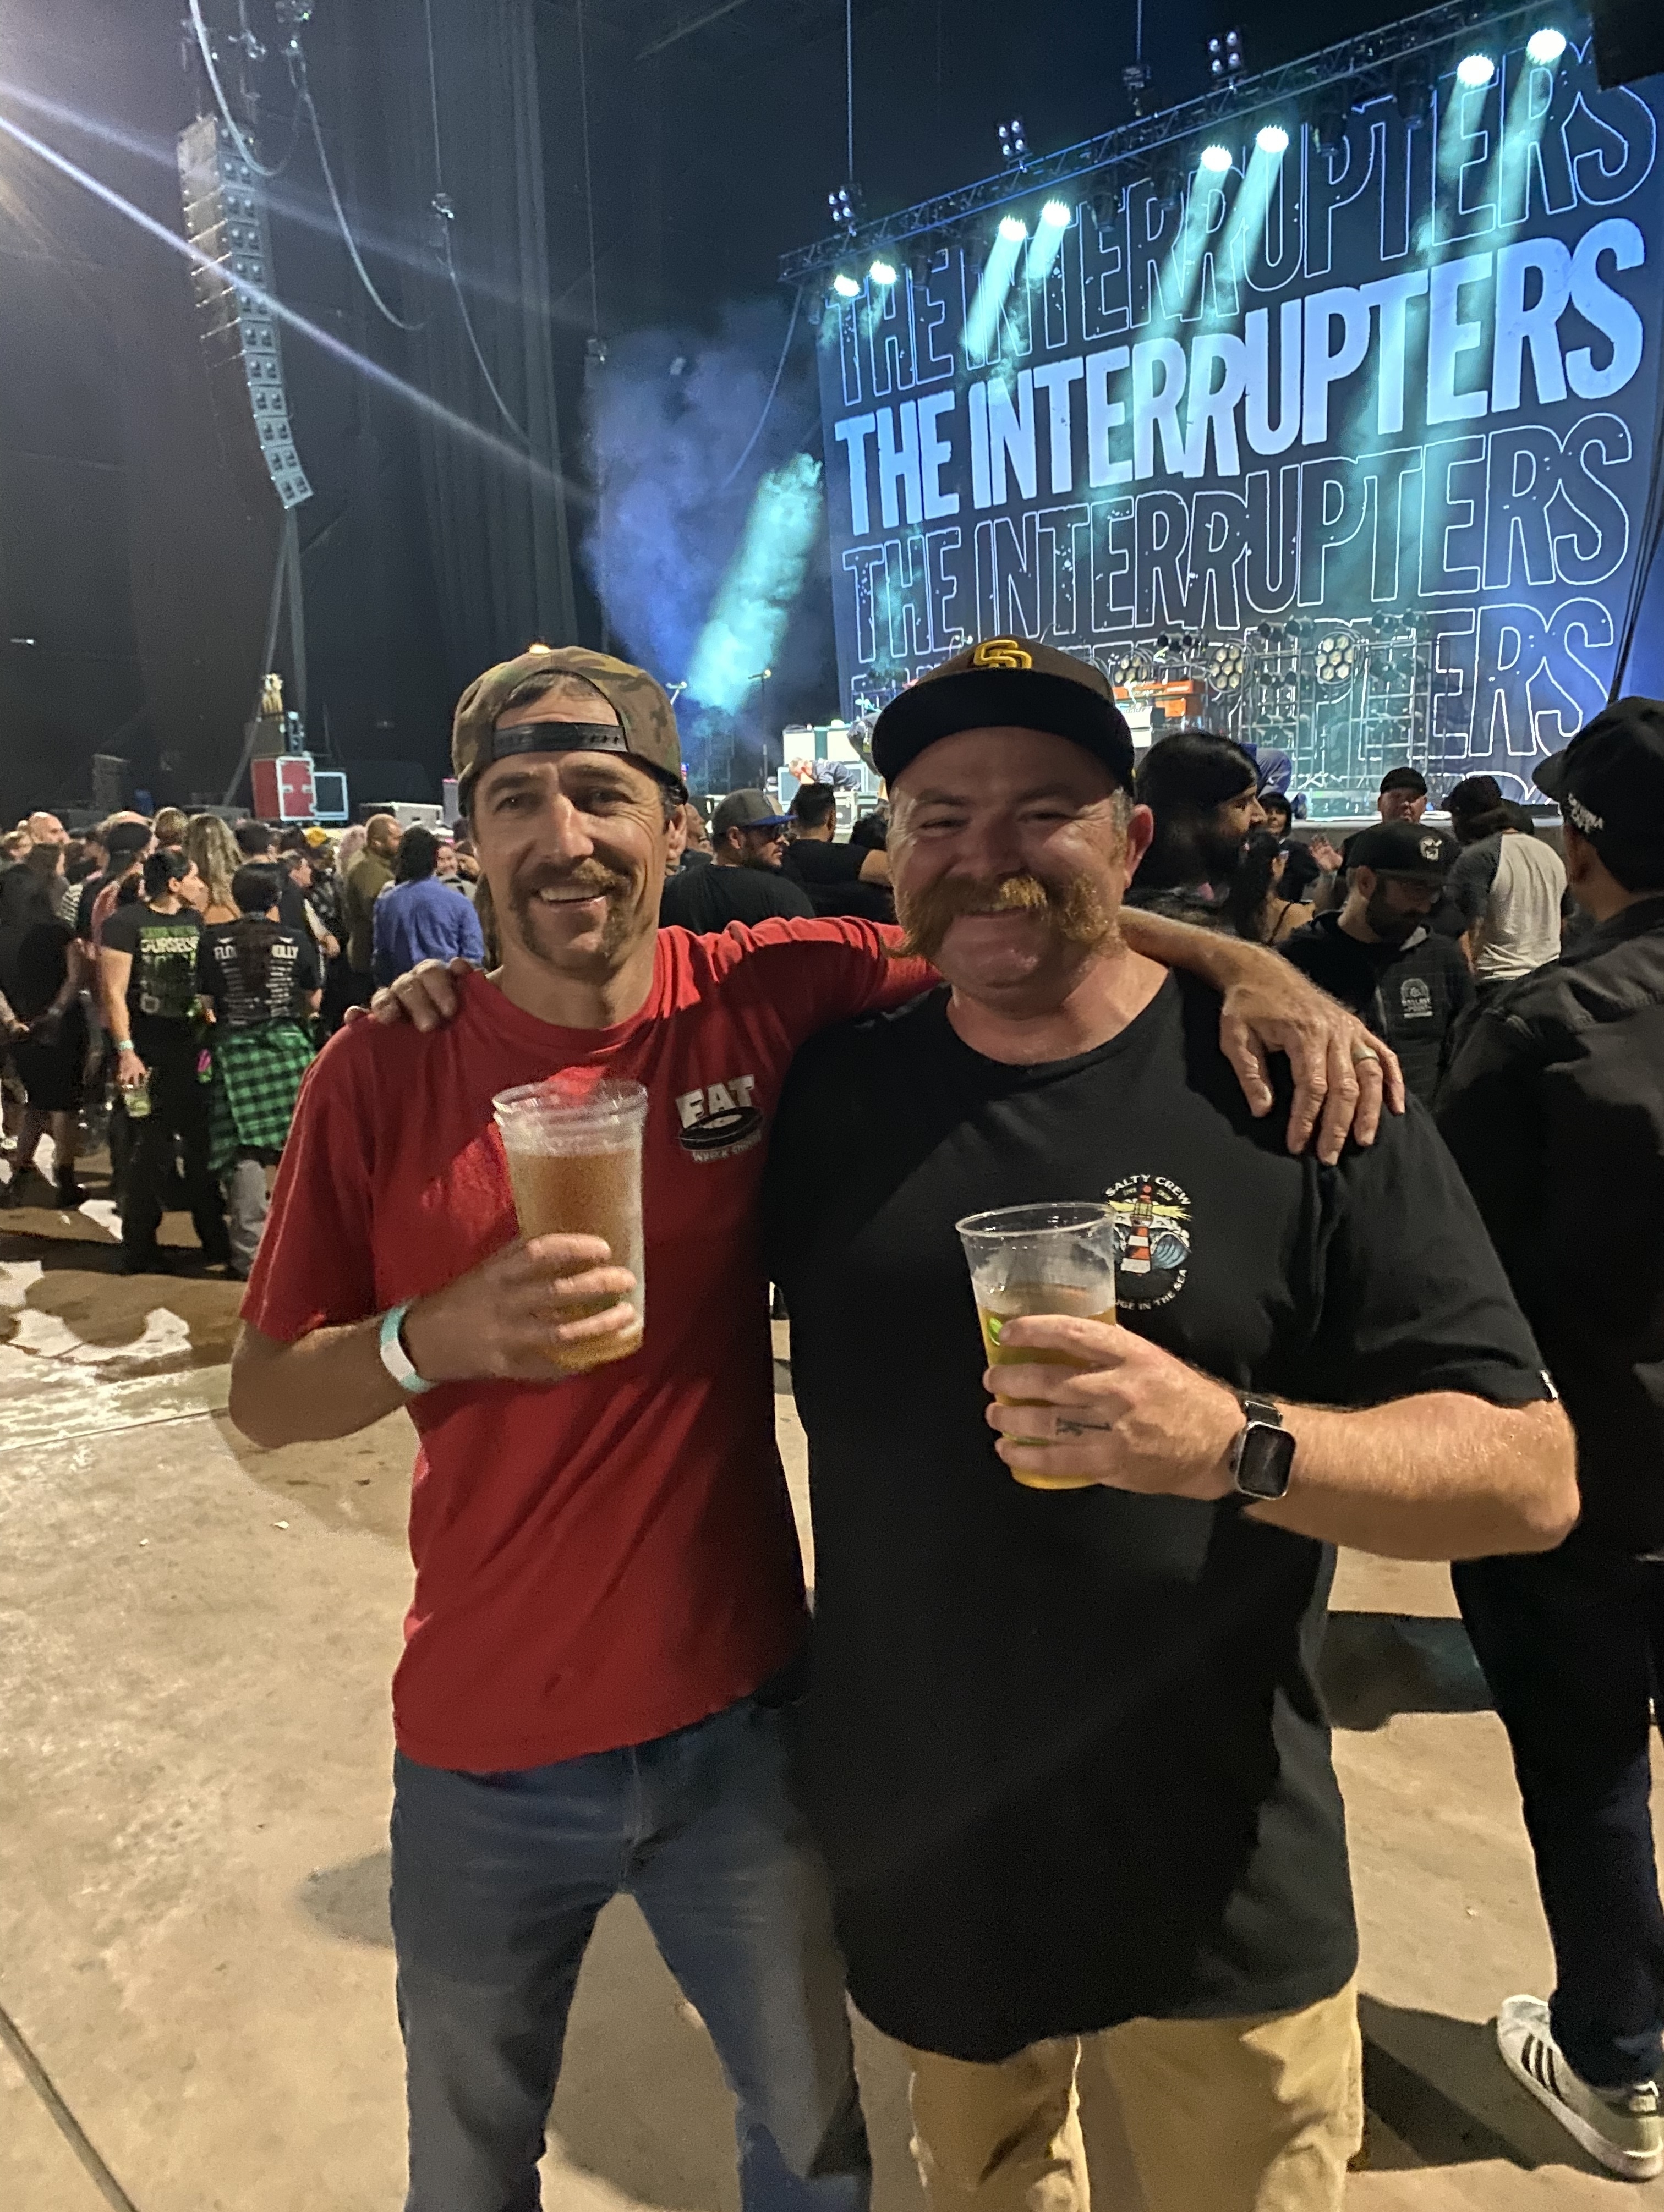 Flogging Molly & the Interrupters